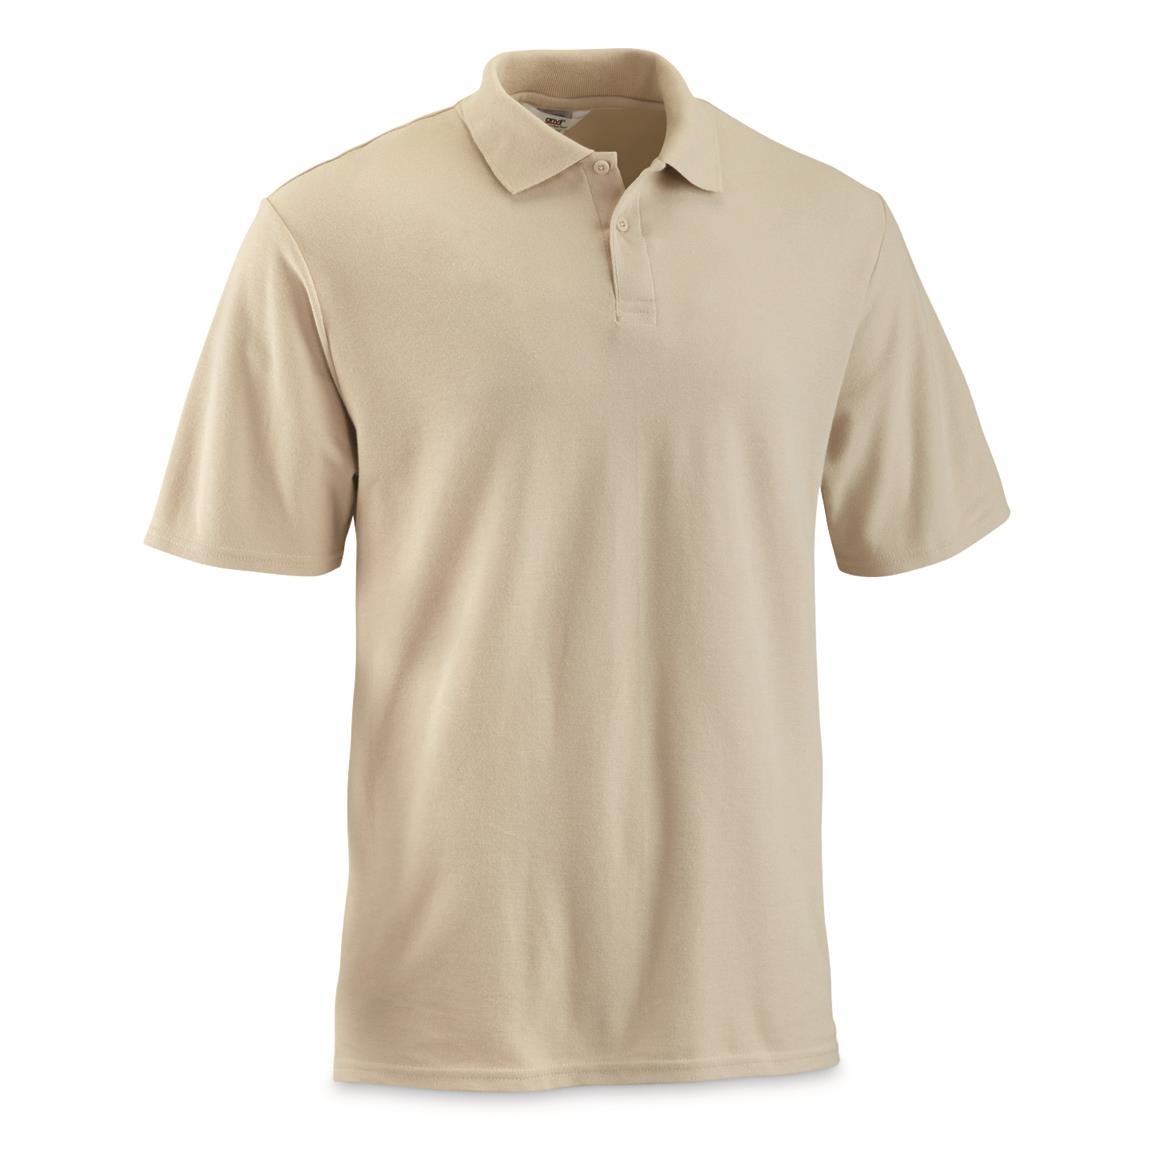 U.S. Military Surplus Tactical Short Sleeve Polo Shirts, 2 Pack, New, Tan